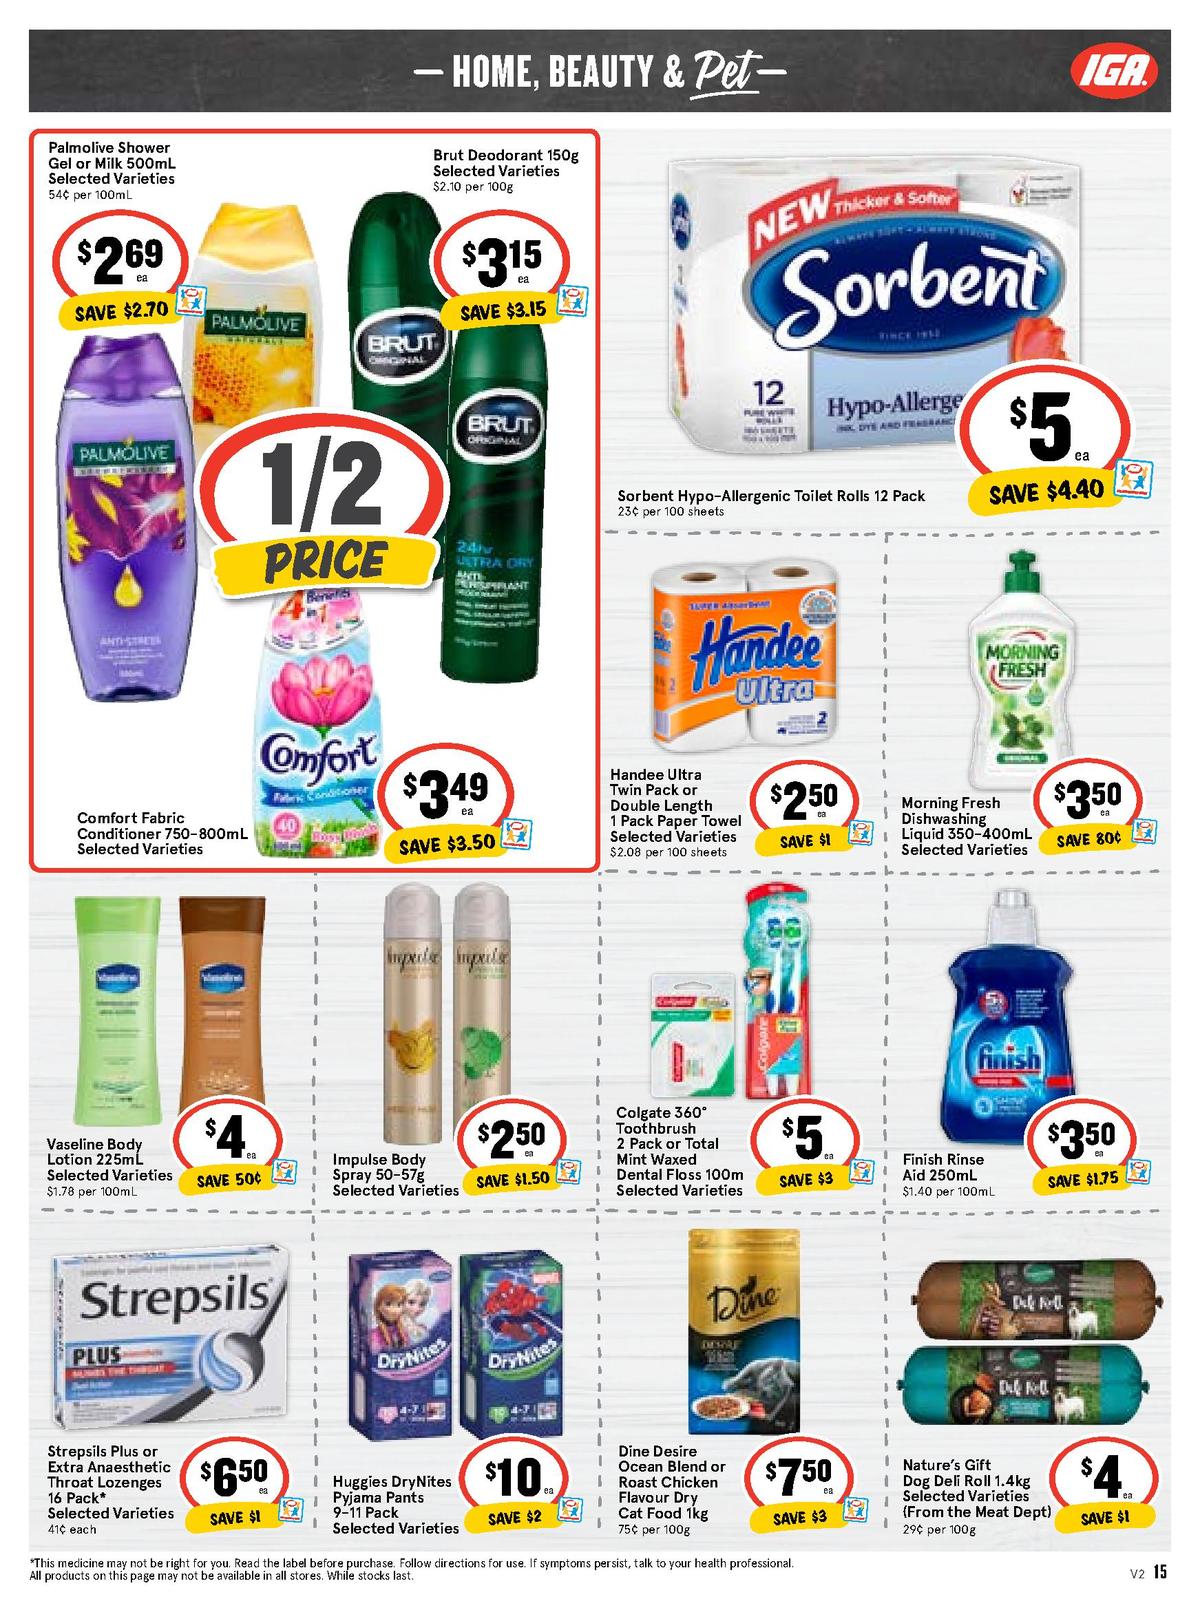 IGA Catalogues from 14 August